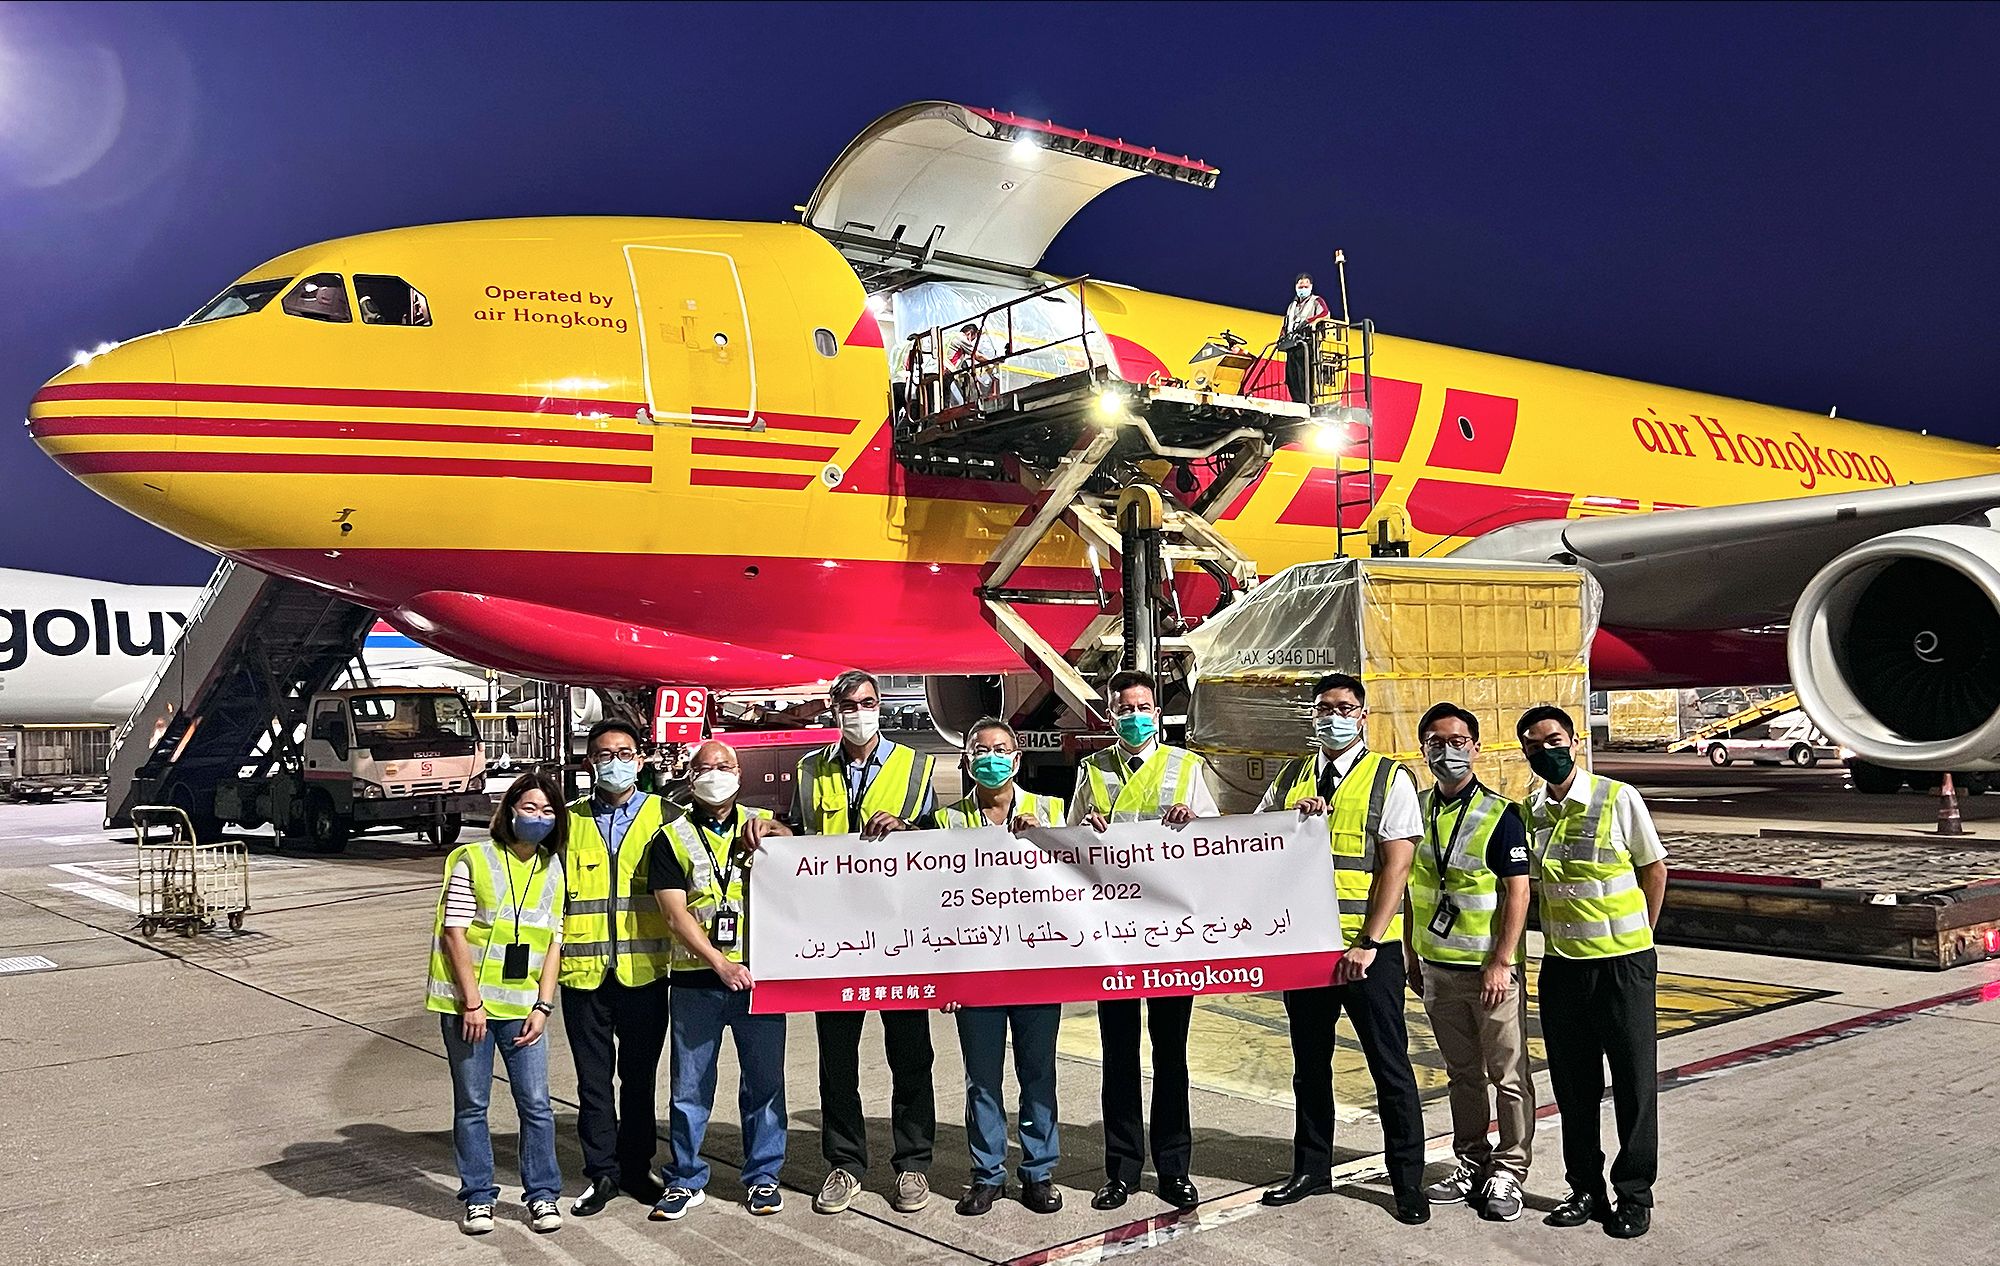 Photo of a group of staff in safety vest holding up a banner in front of an air hong kong and DHL freighter